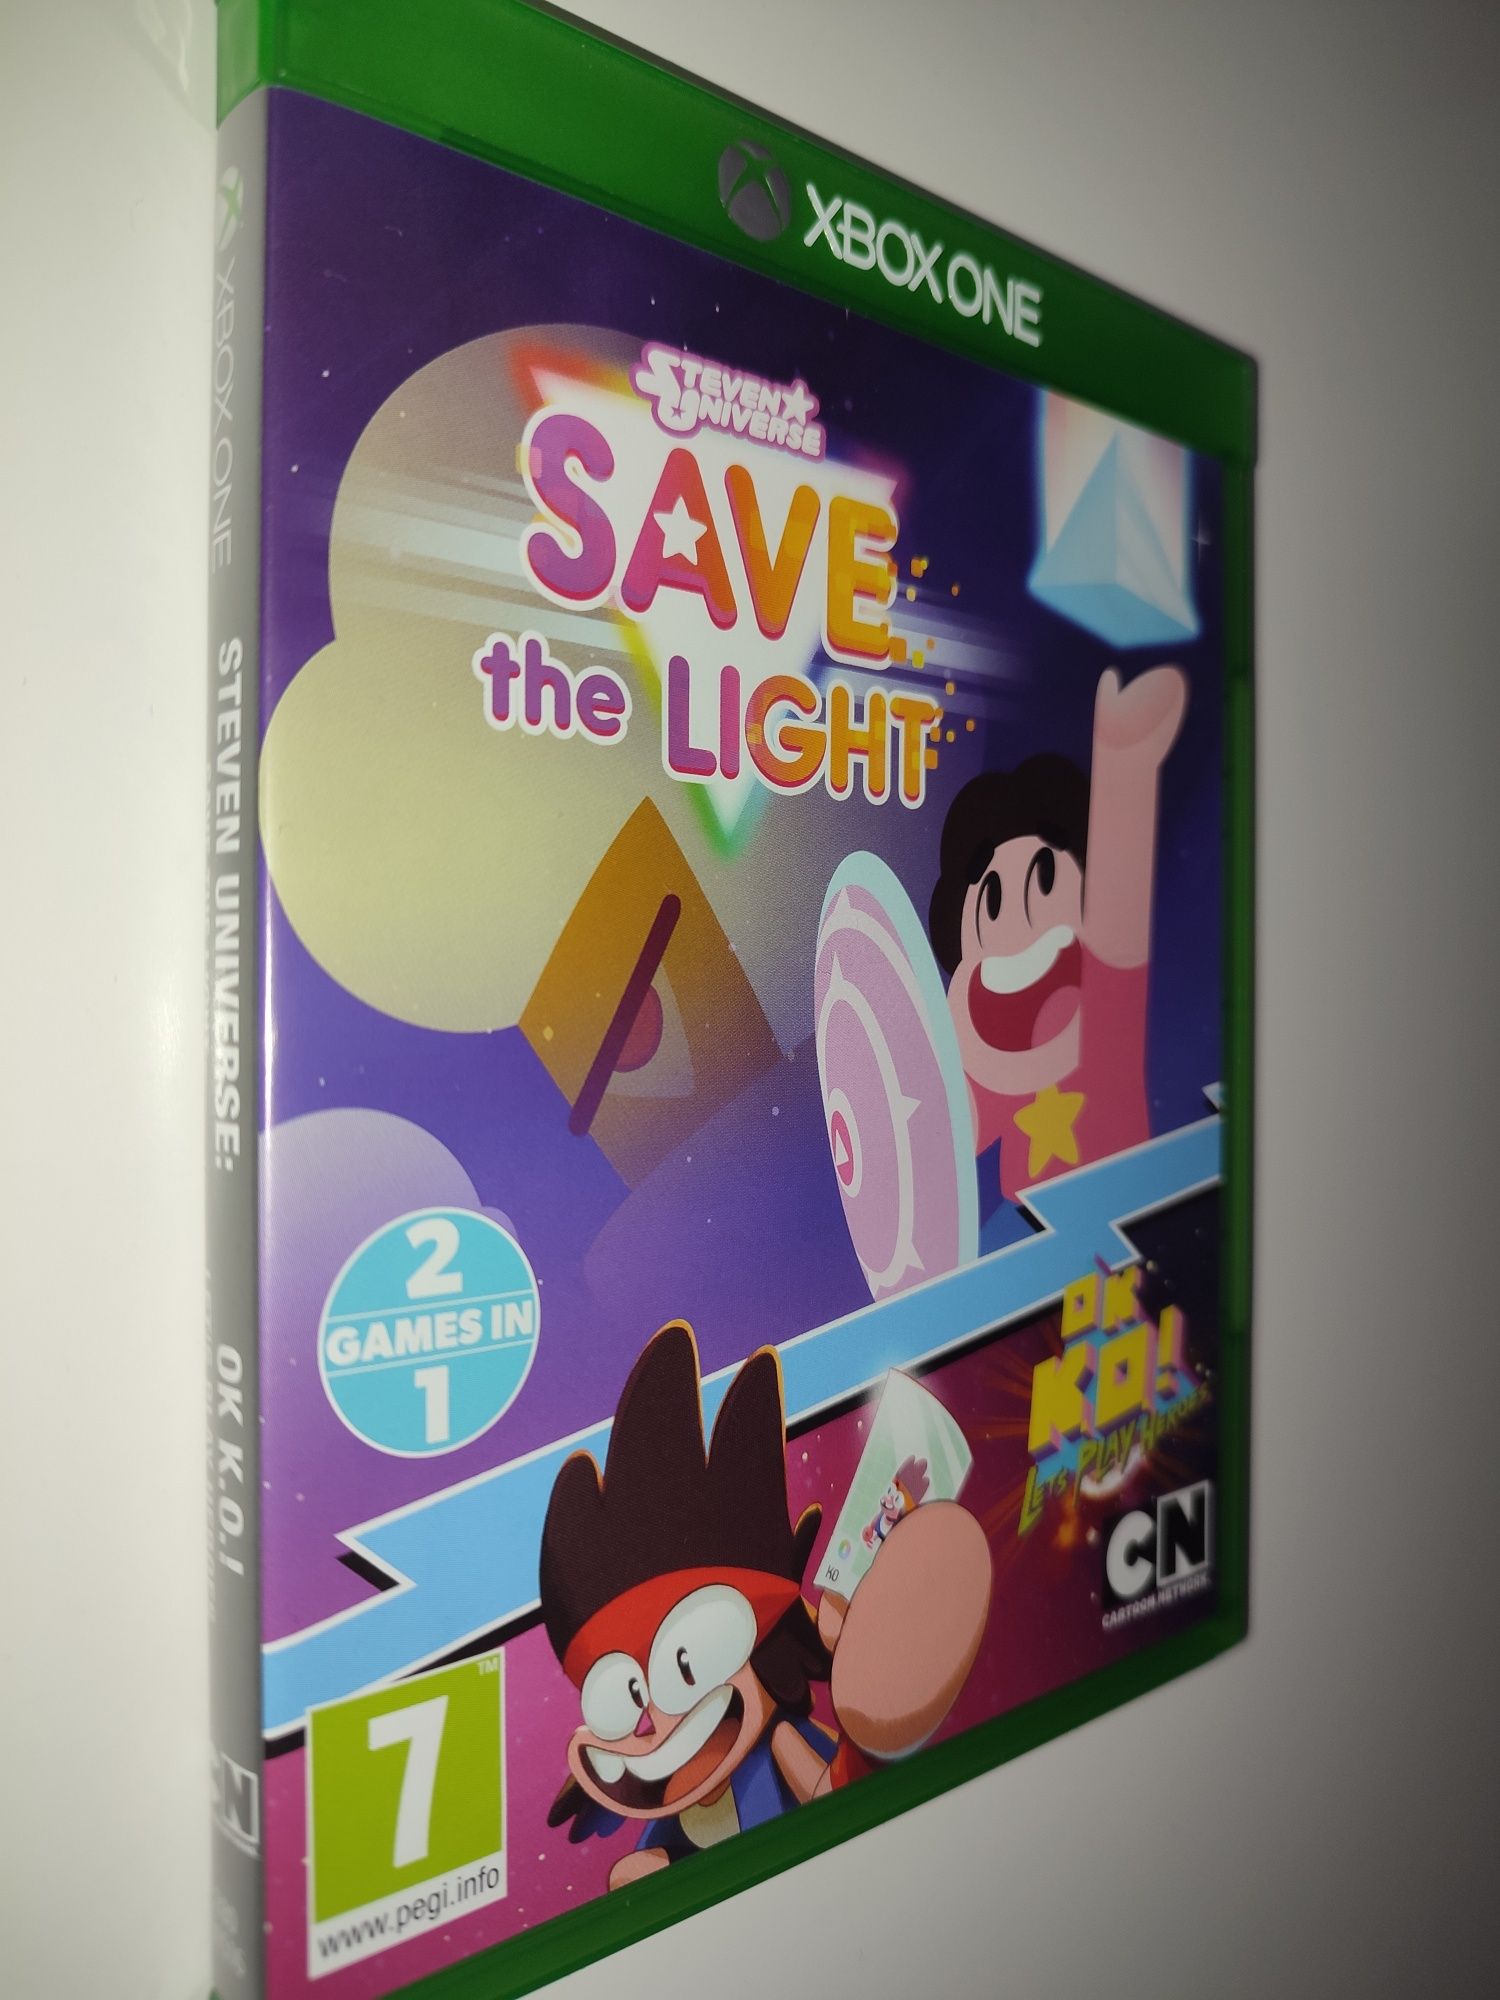 Gra Xbox One Steven Universe Save The Light 2 gry w 1 Hit